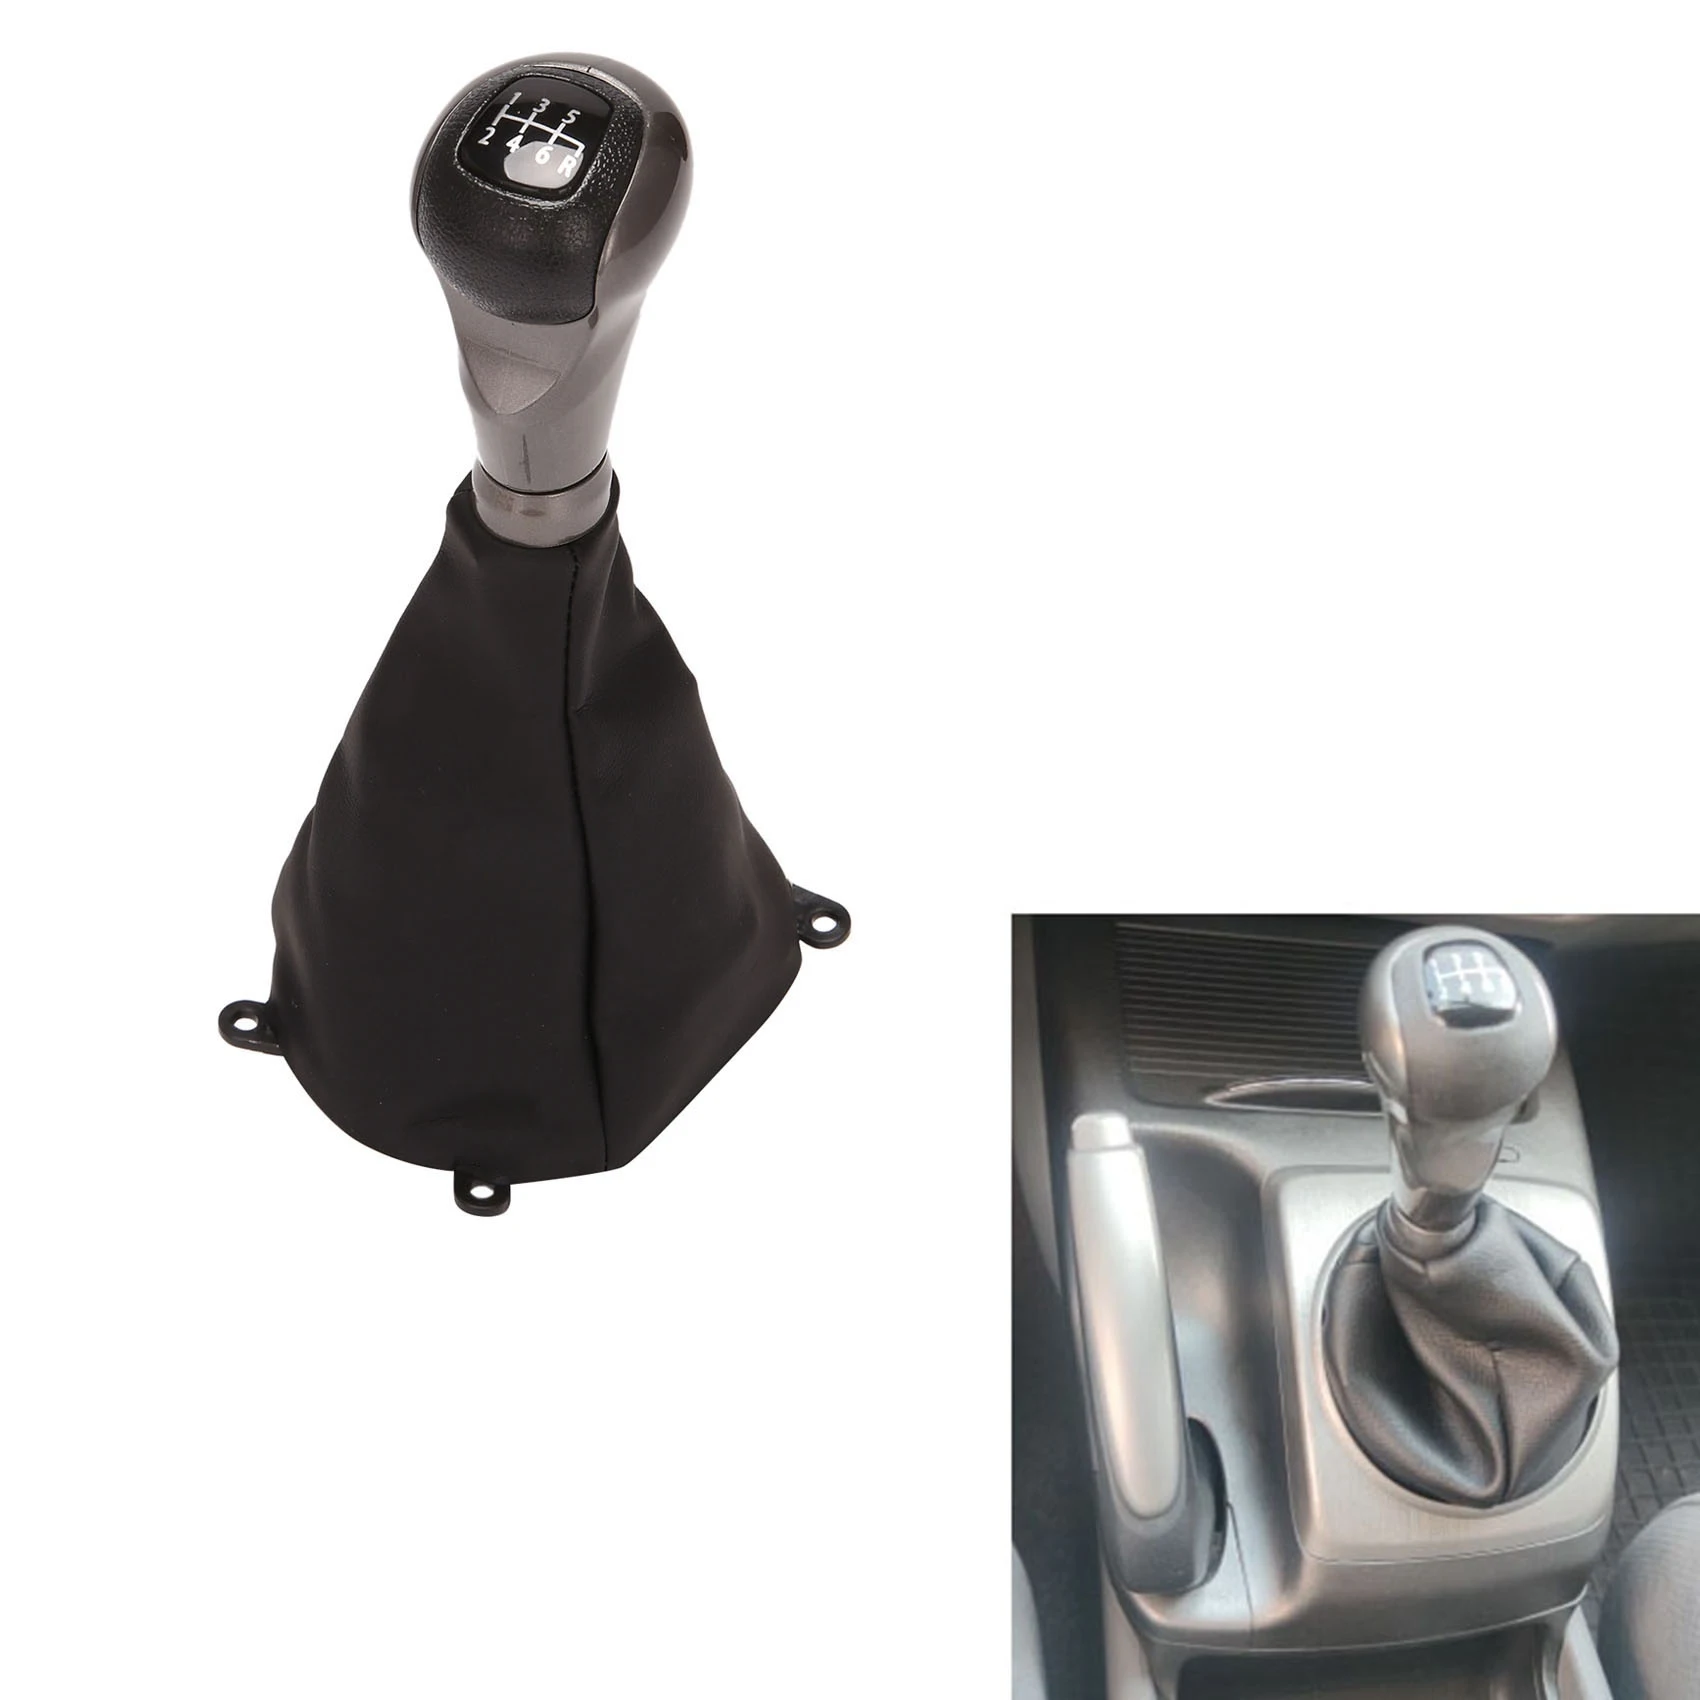 

6 Speed Gear Shift Knob Lever Stick Gaiter with Dust Cover for Honda Civic DX EX LX Model 2006-2011 Auto Accessories